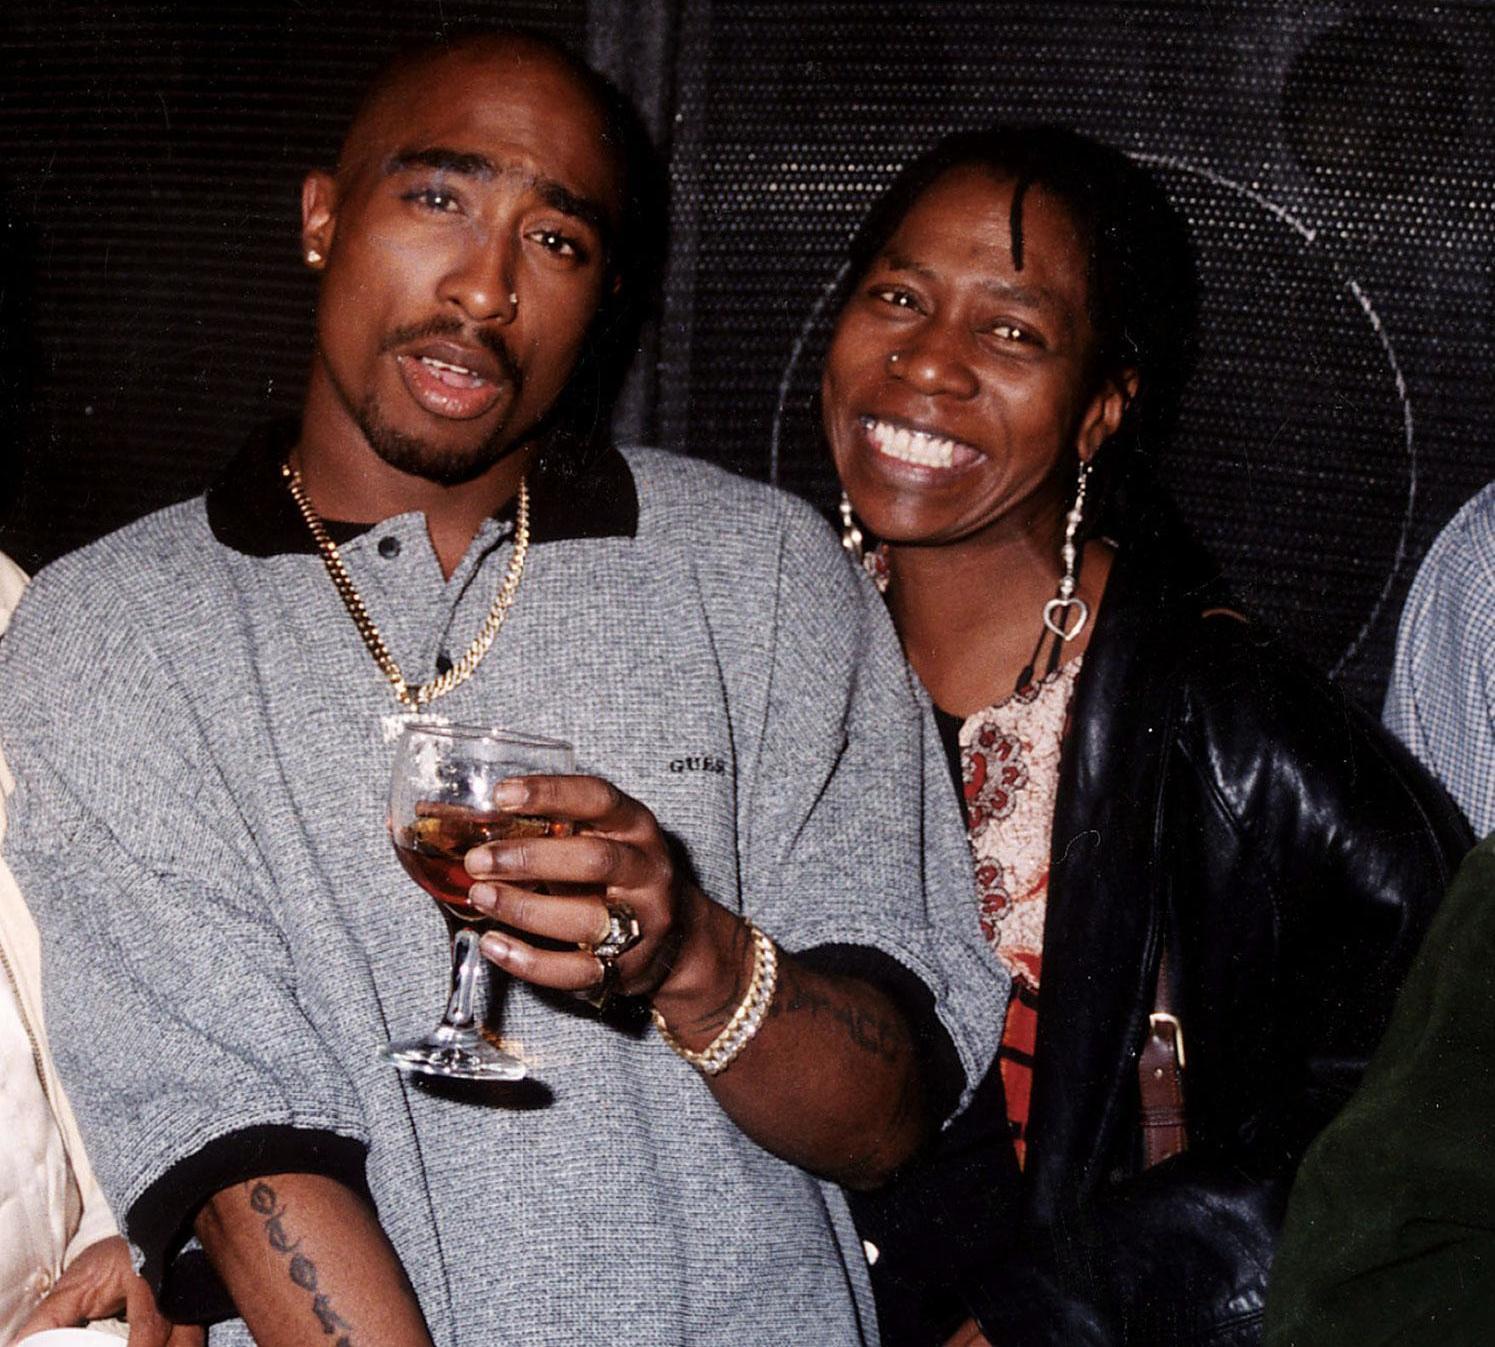 PHOTO: Tupac Shakur is pictured with his mother Afeni Shakur in a photo released in conjunction with the film, "Tupac: Ressurection" in 2003.